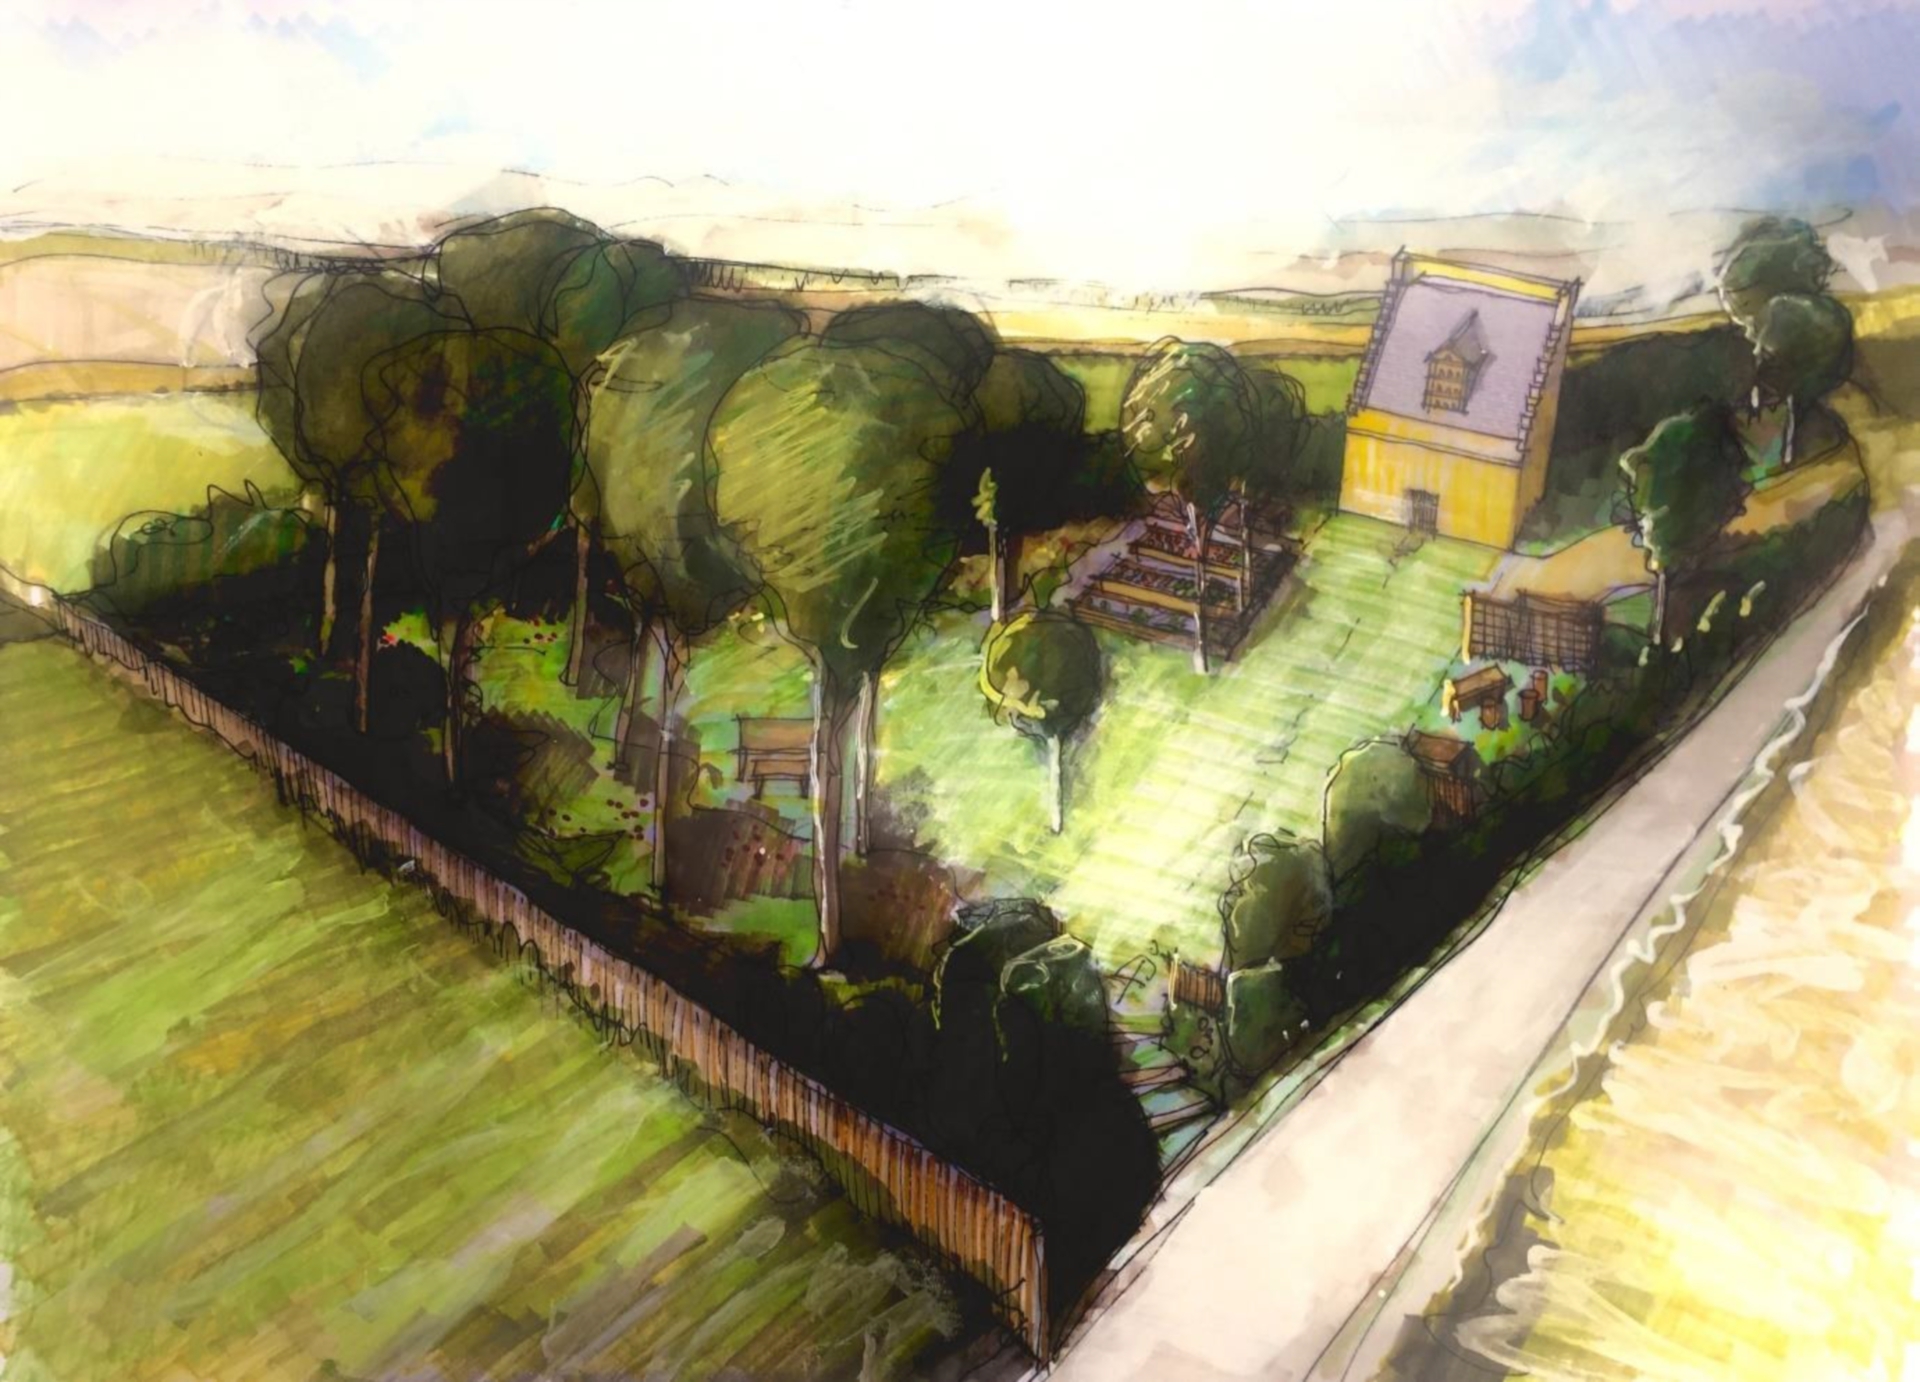 An artist's impression of the site.